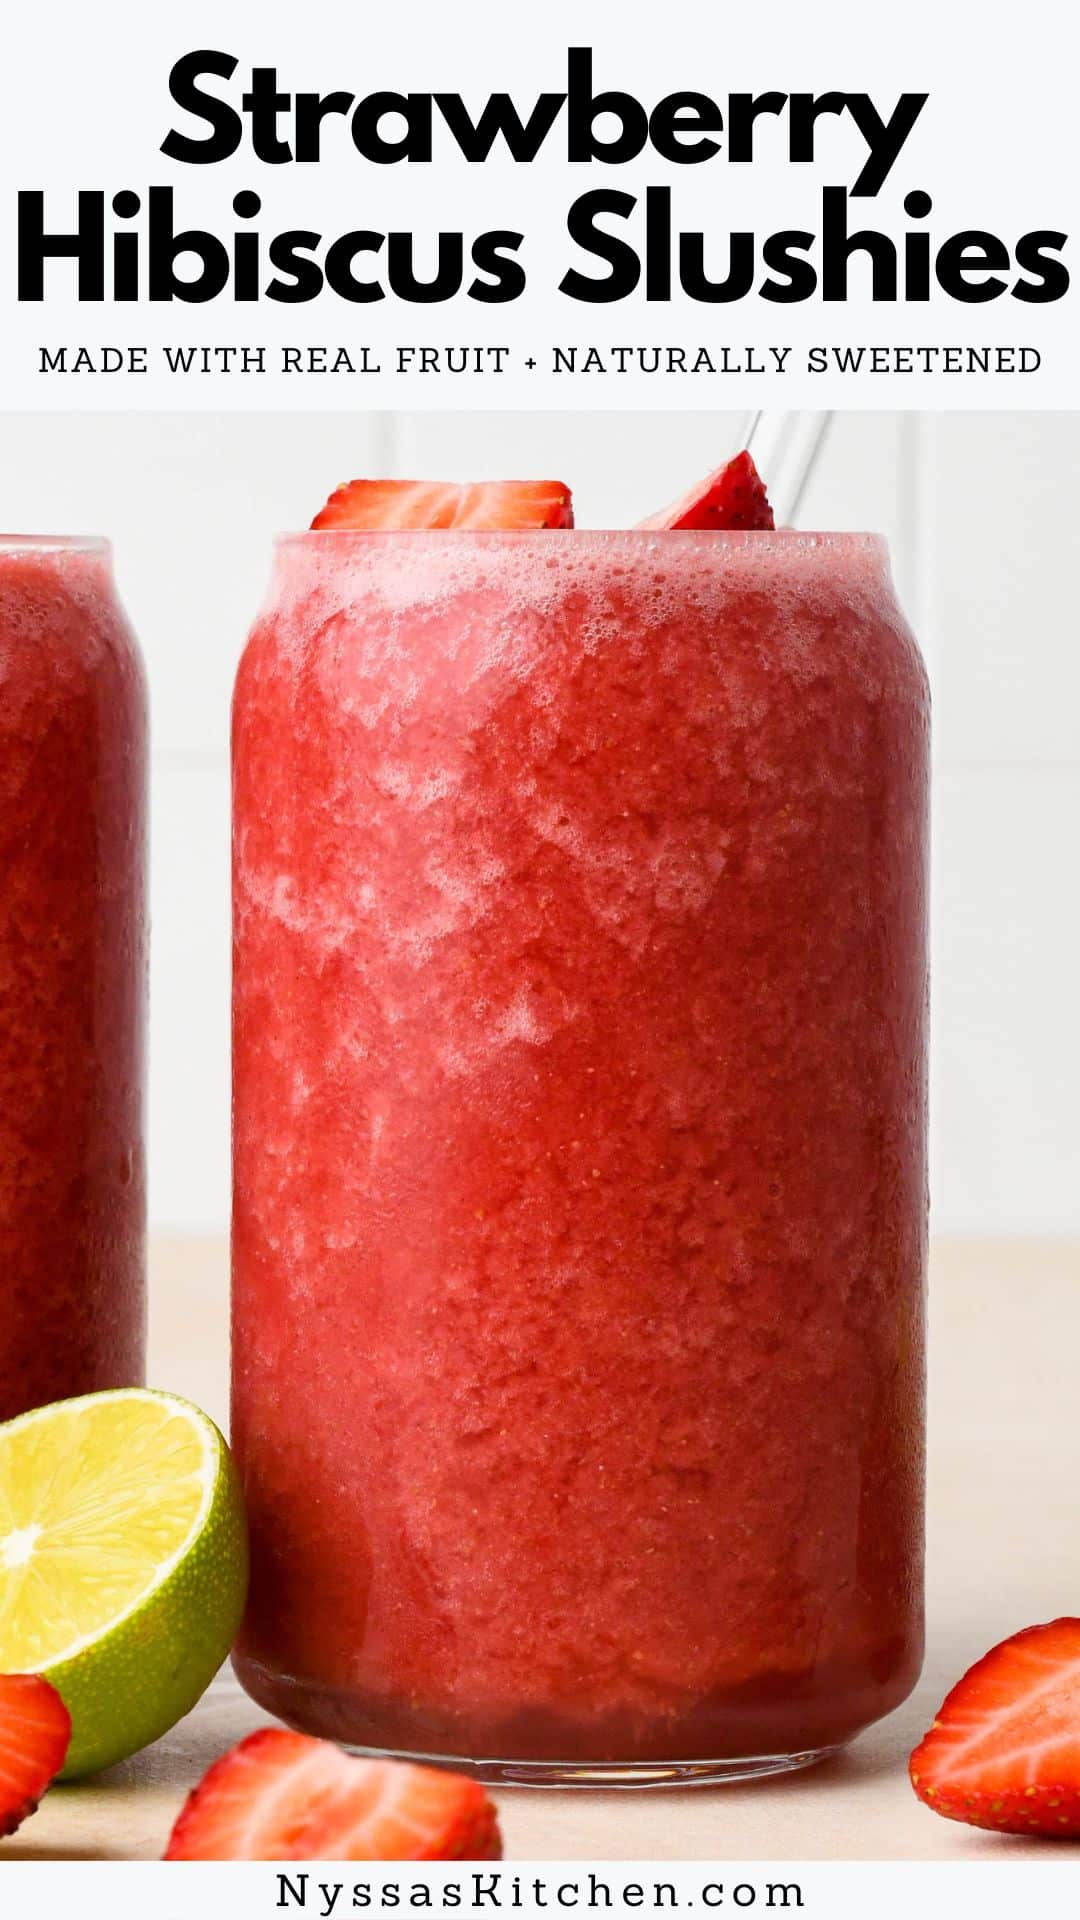 Nothing says summer quite like strawberry hibiscus slushies! An easy frozen drink made with real, good-for-you ingredients like frozen strawberries, hibiscus tea, honey, and lime juice. Perfectly sweet tart and full of refreshing, juicy flavor! Gluten free, vegan, paleo.